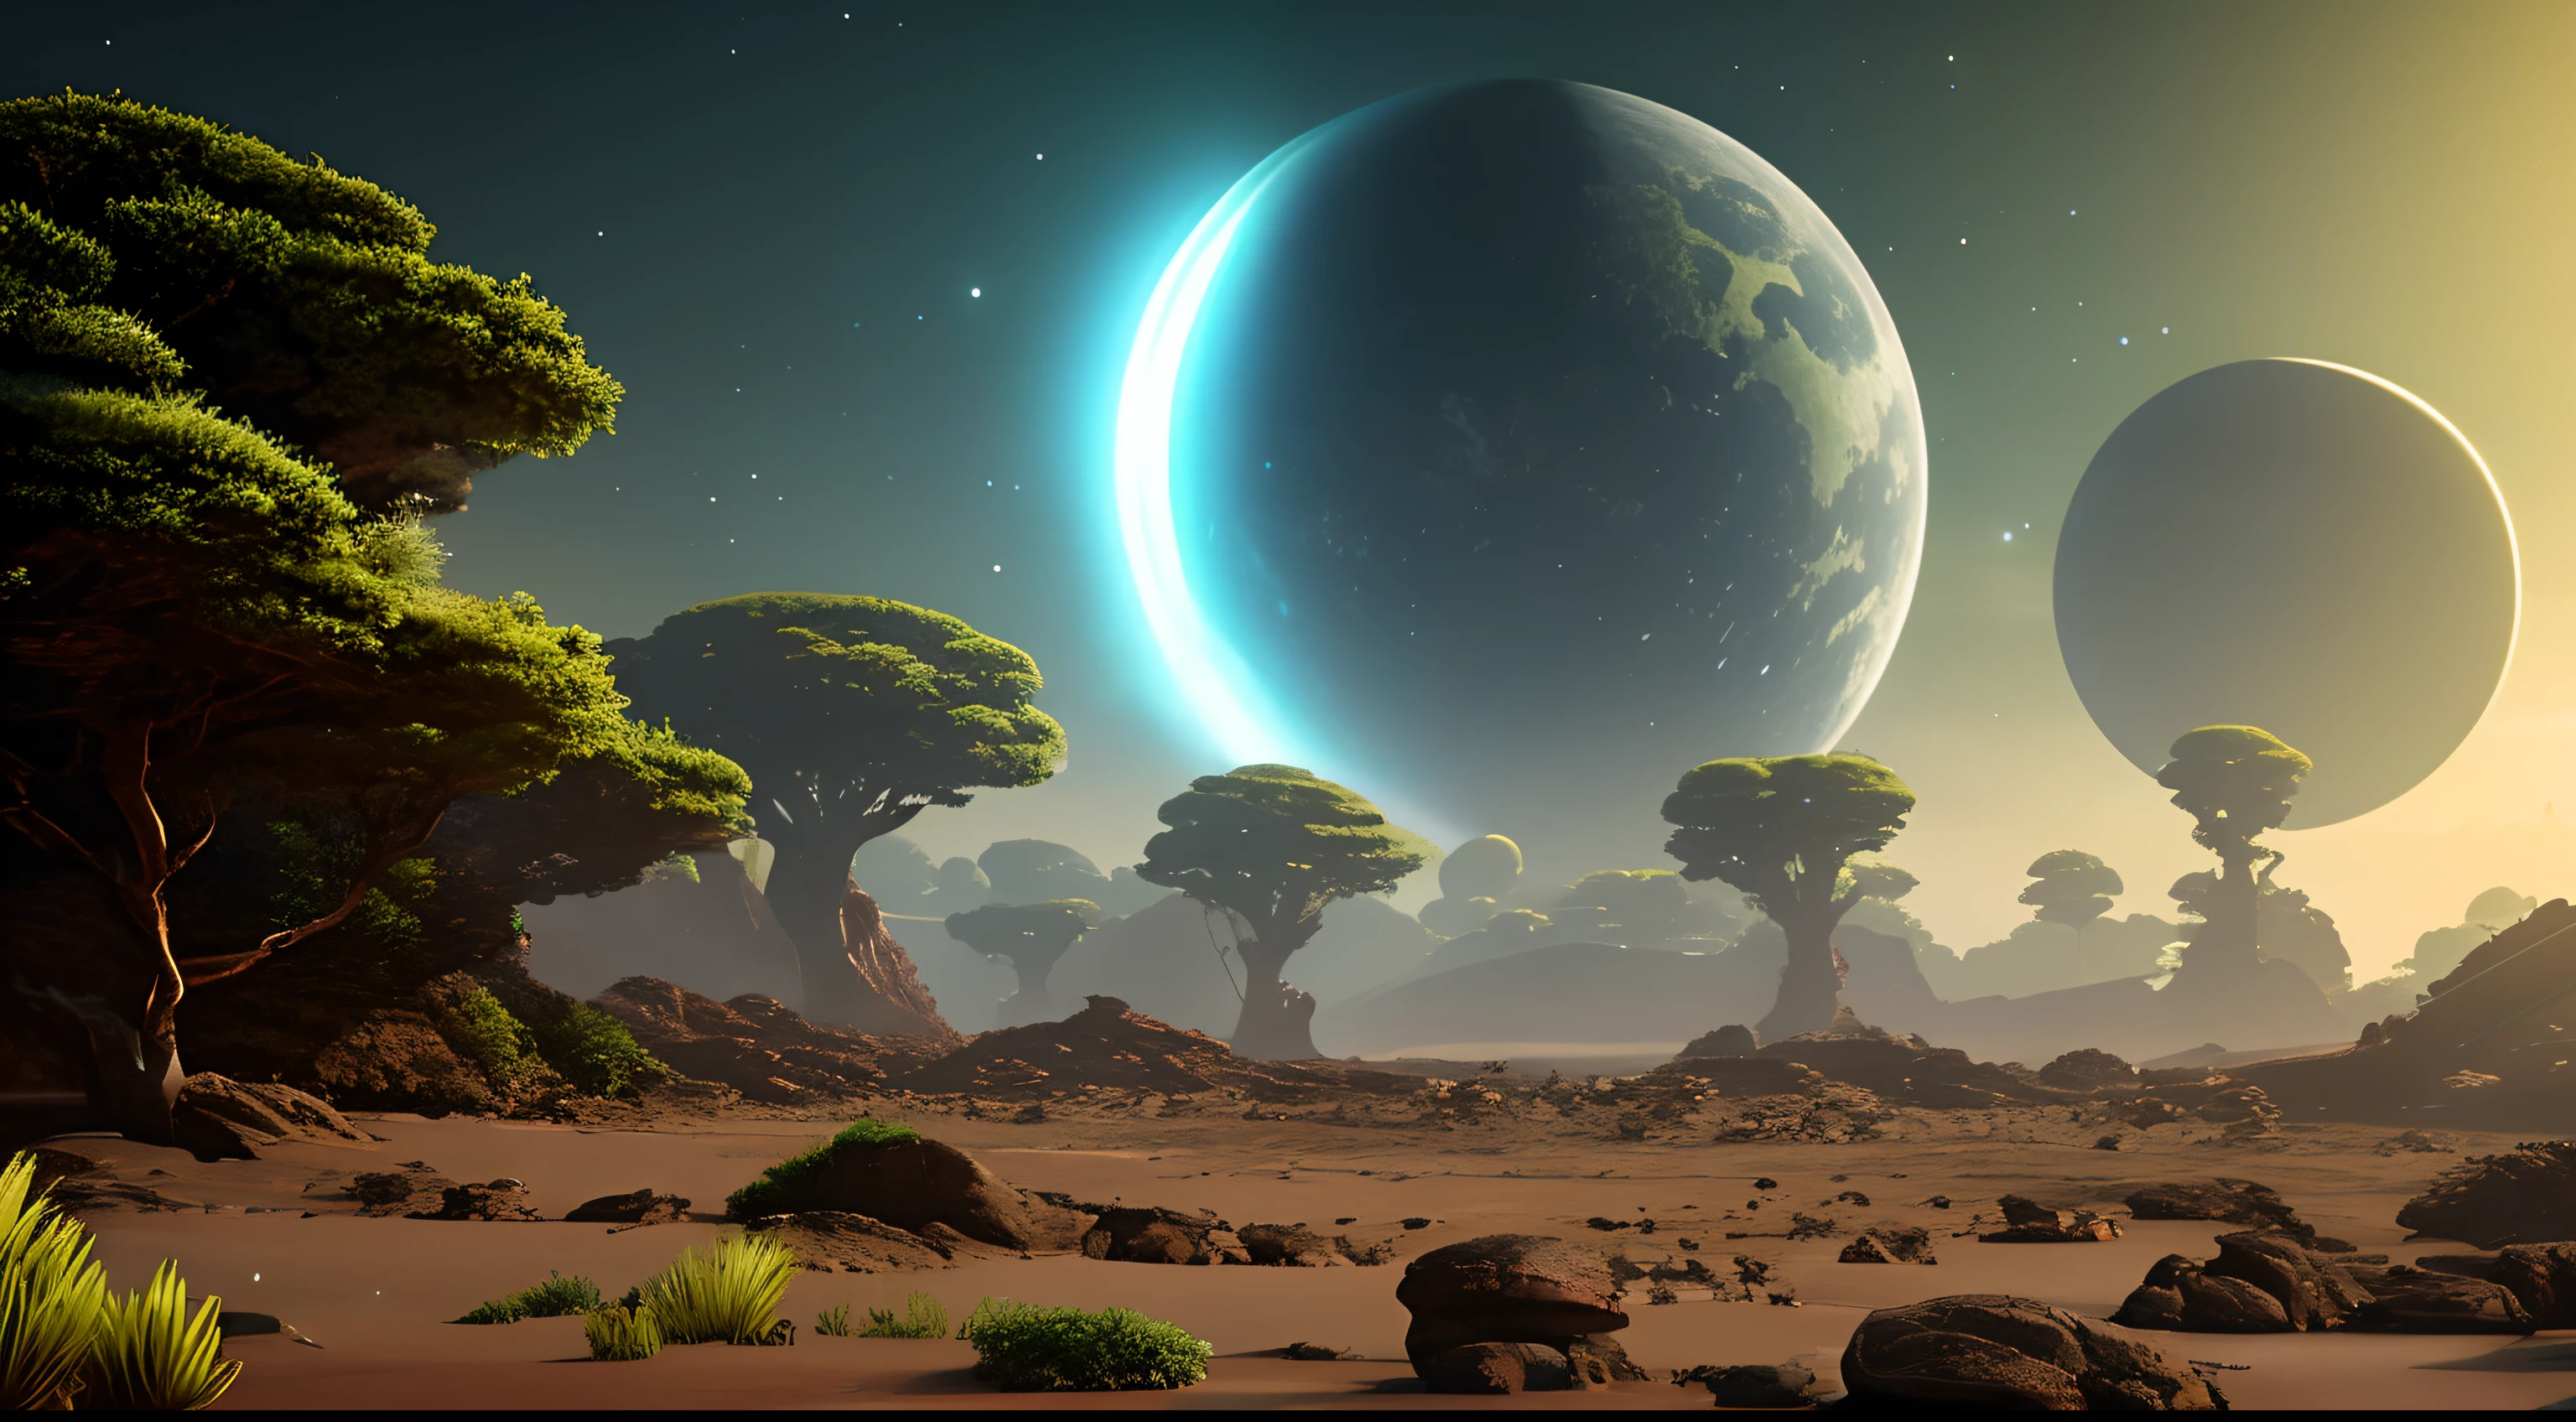 Outer Rim Alien Planet, with lush vegetation. Ambiente visualmente intrigante, com sombras profundas e respingos de luzes brilhantes para intensificar a atmosfera de suspense. As cores devem ser ricas e contrastantes, Catching the viewer's attention. This image should capture the essence of space exploration on an unknown planet, conveying the sense of mystery, Adventure and discovery that permeate the scenery.